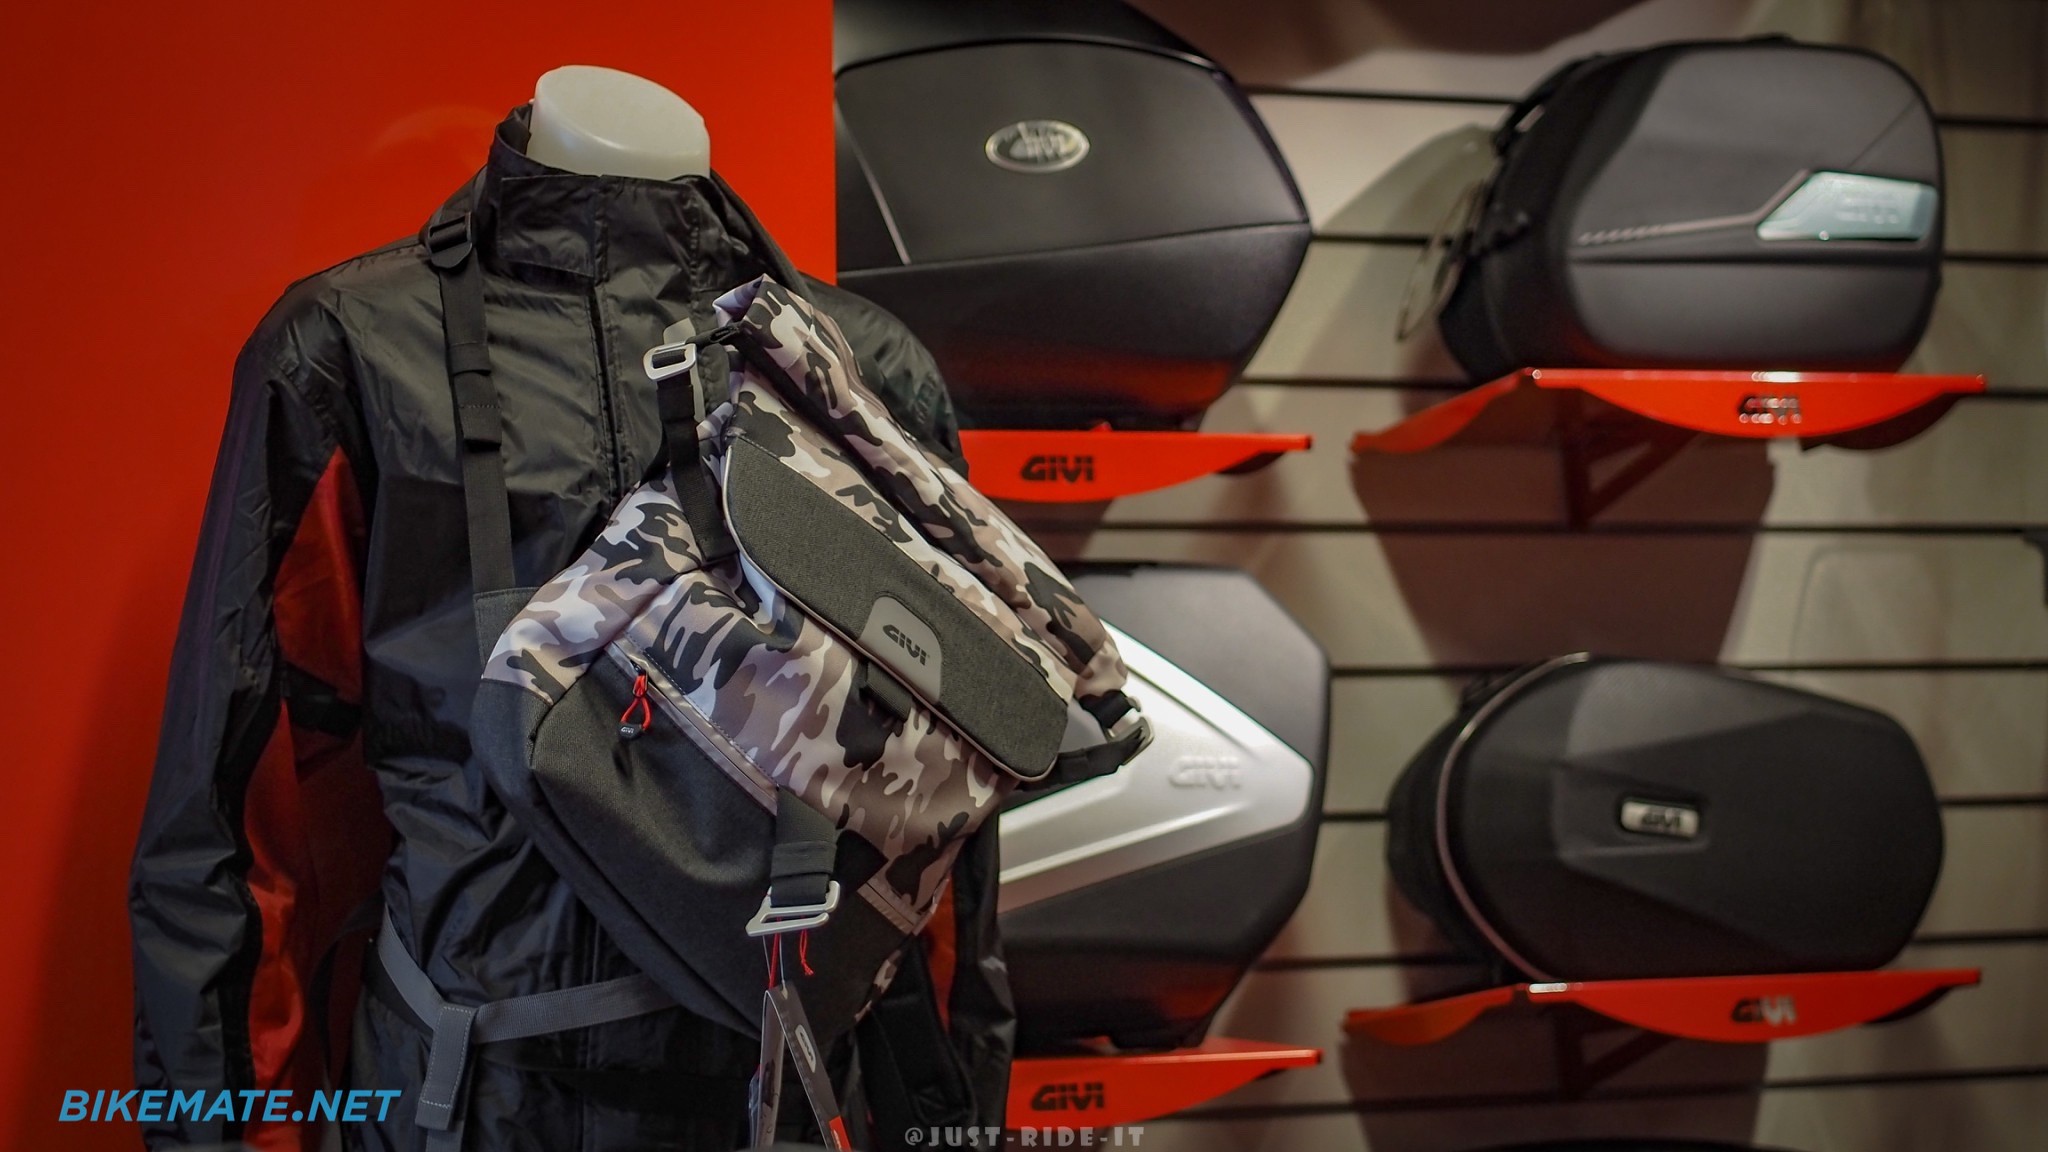 GIVI accessories and side cases on display at GIVI Point Bangkok